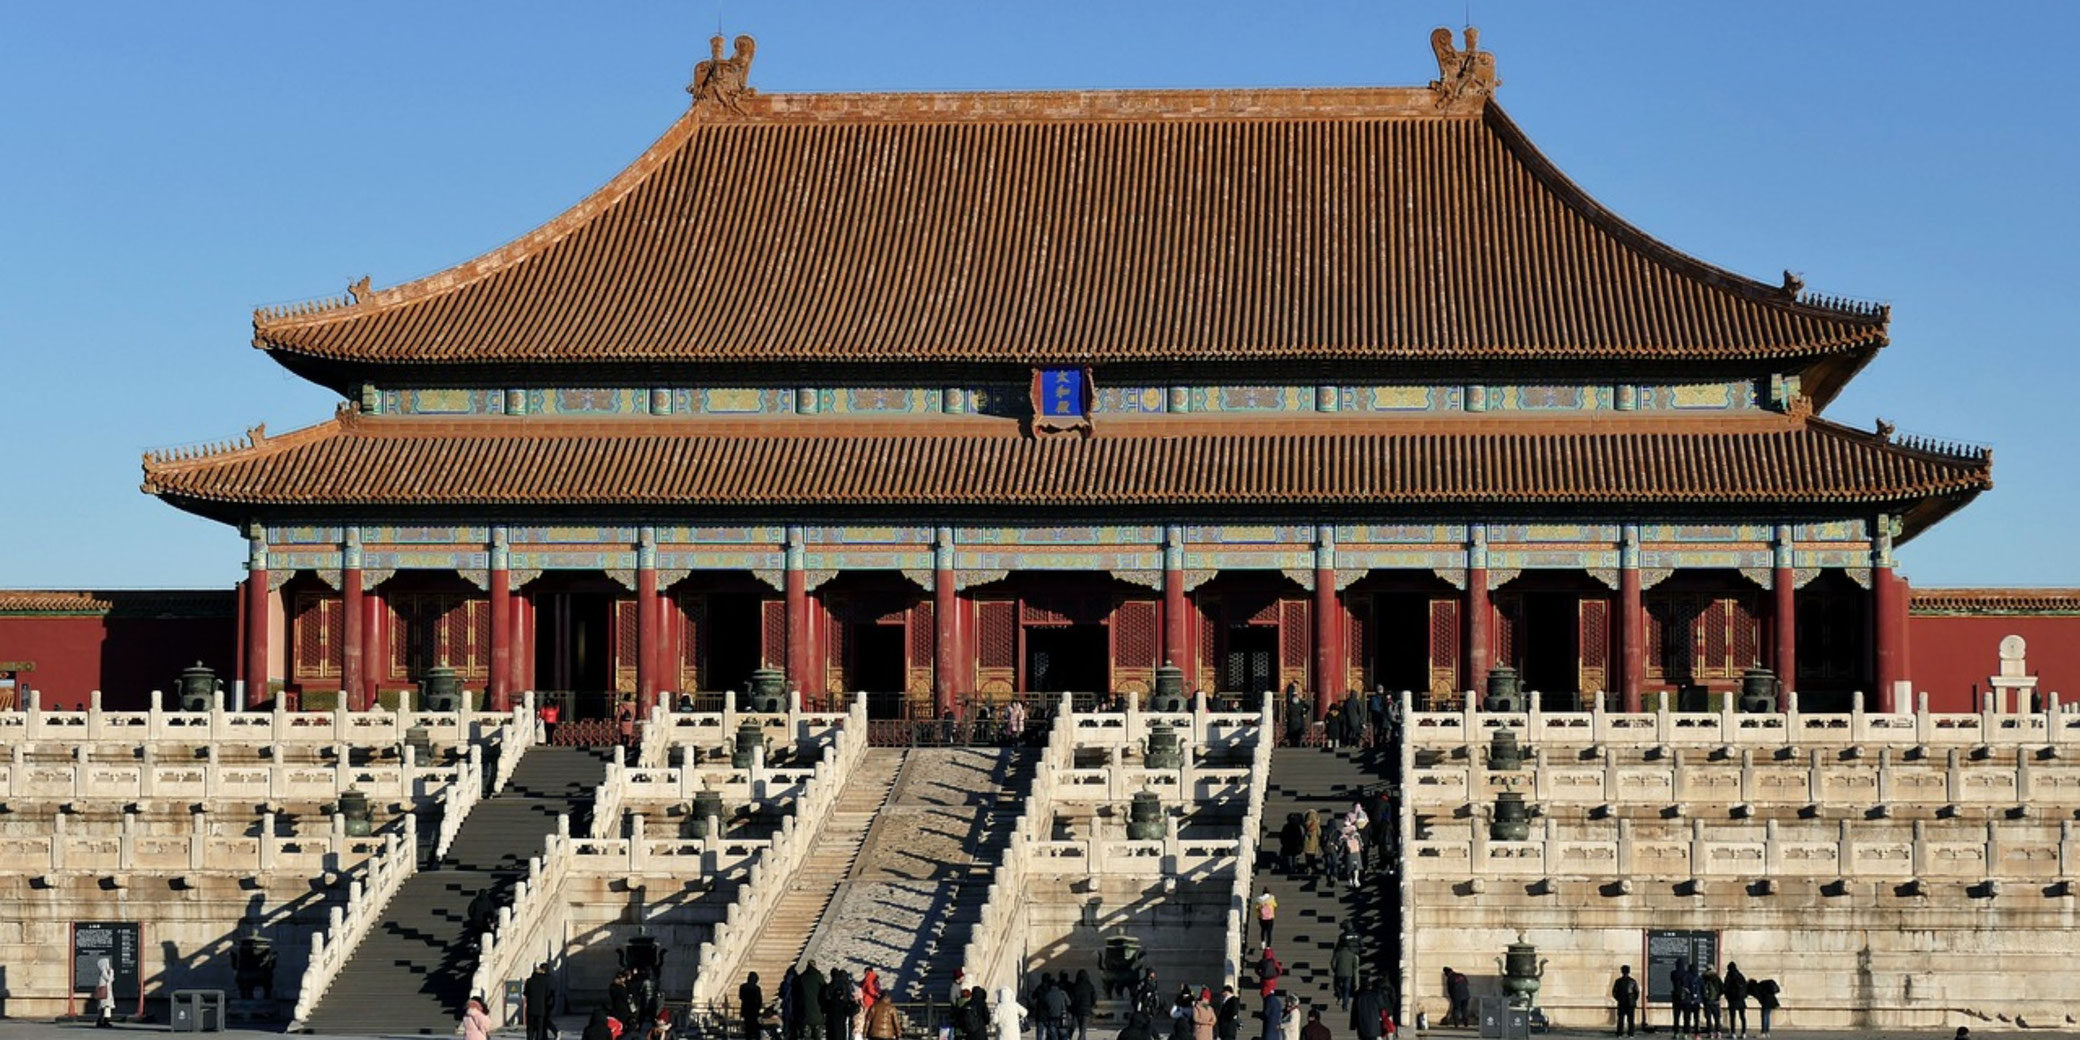 The Forbidden City: The medieval centre of China's power and